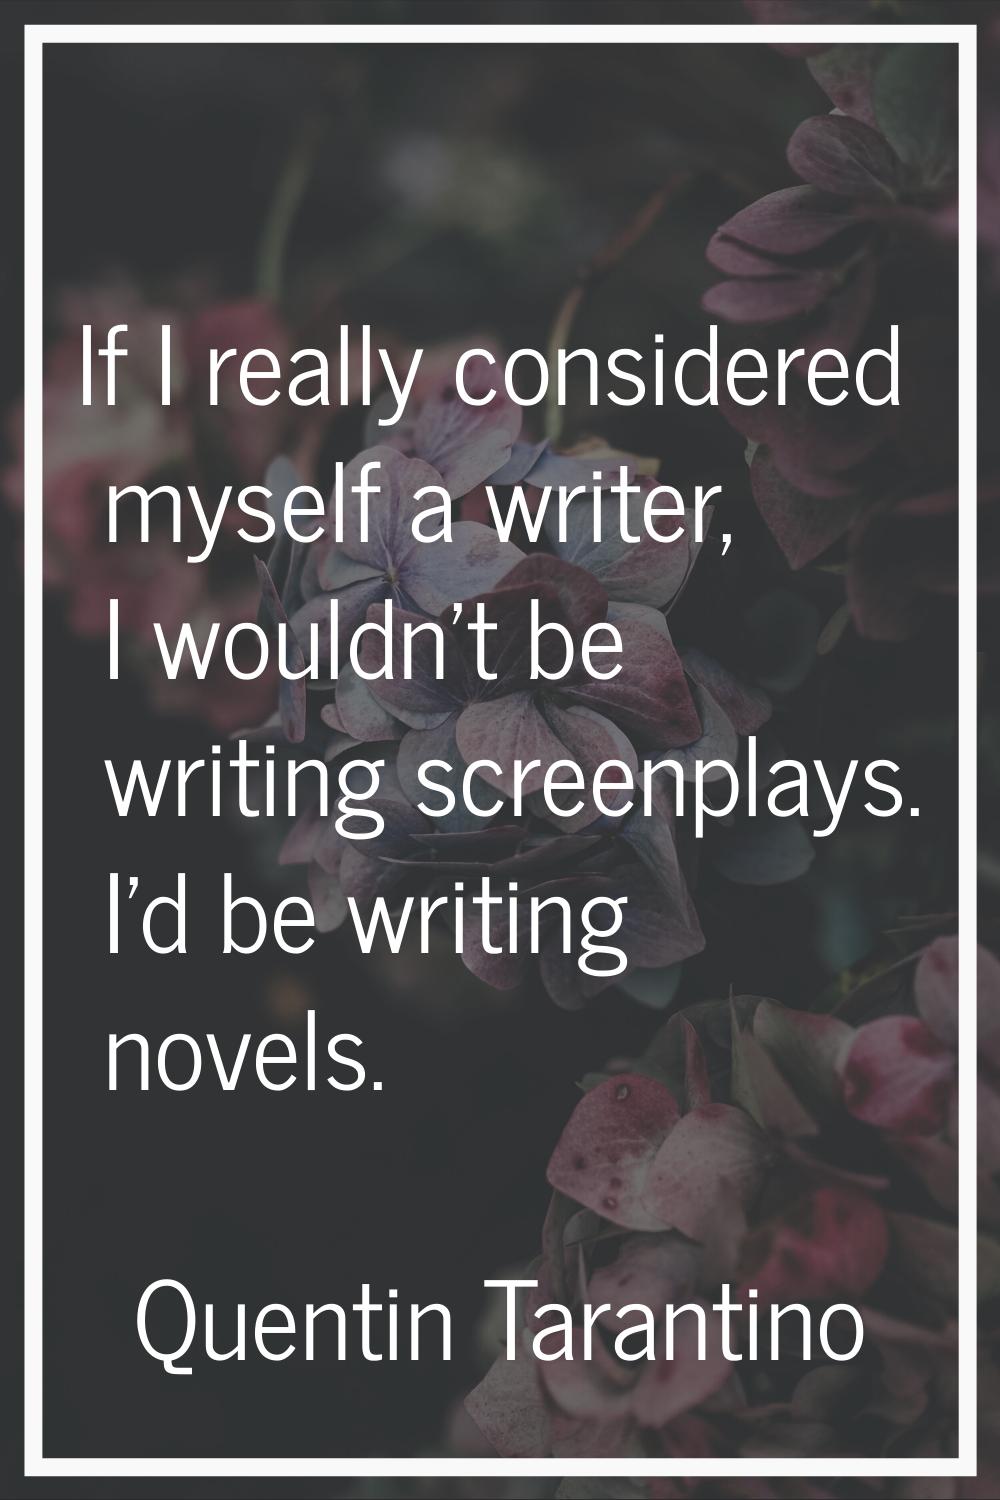 If I really considered myself a writer, I wouldn't be writing screenplays. I'd be writing novels.